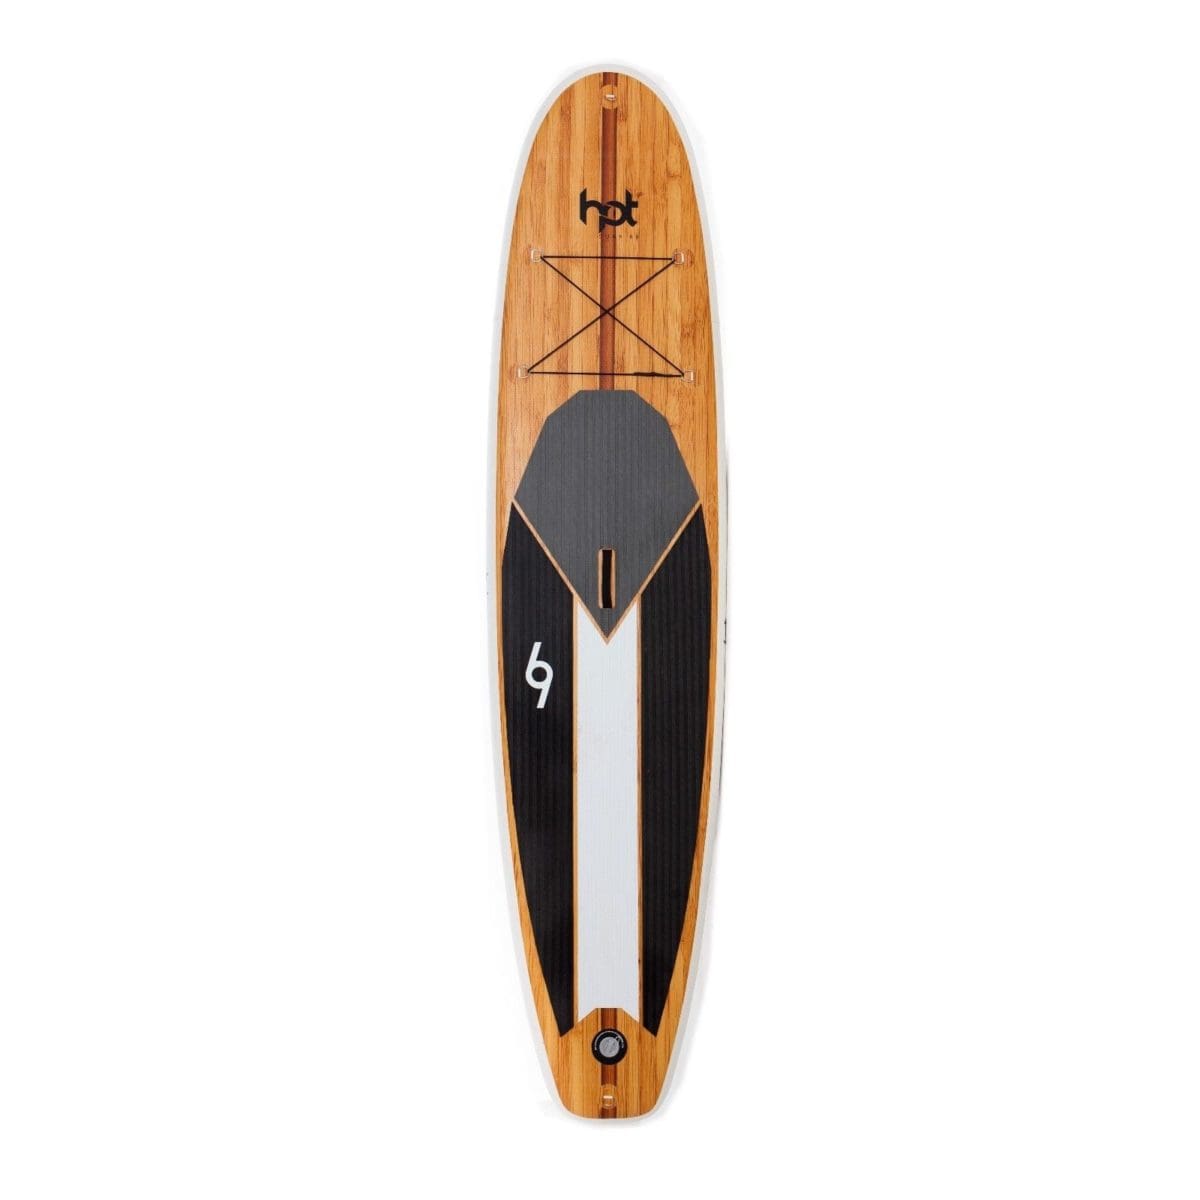 11 ft Hotsurf 69 Stand Up Paddle Board